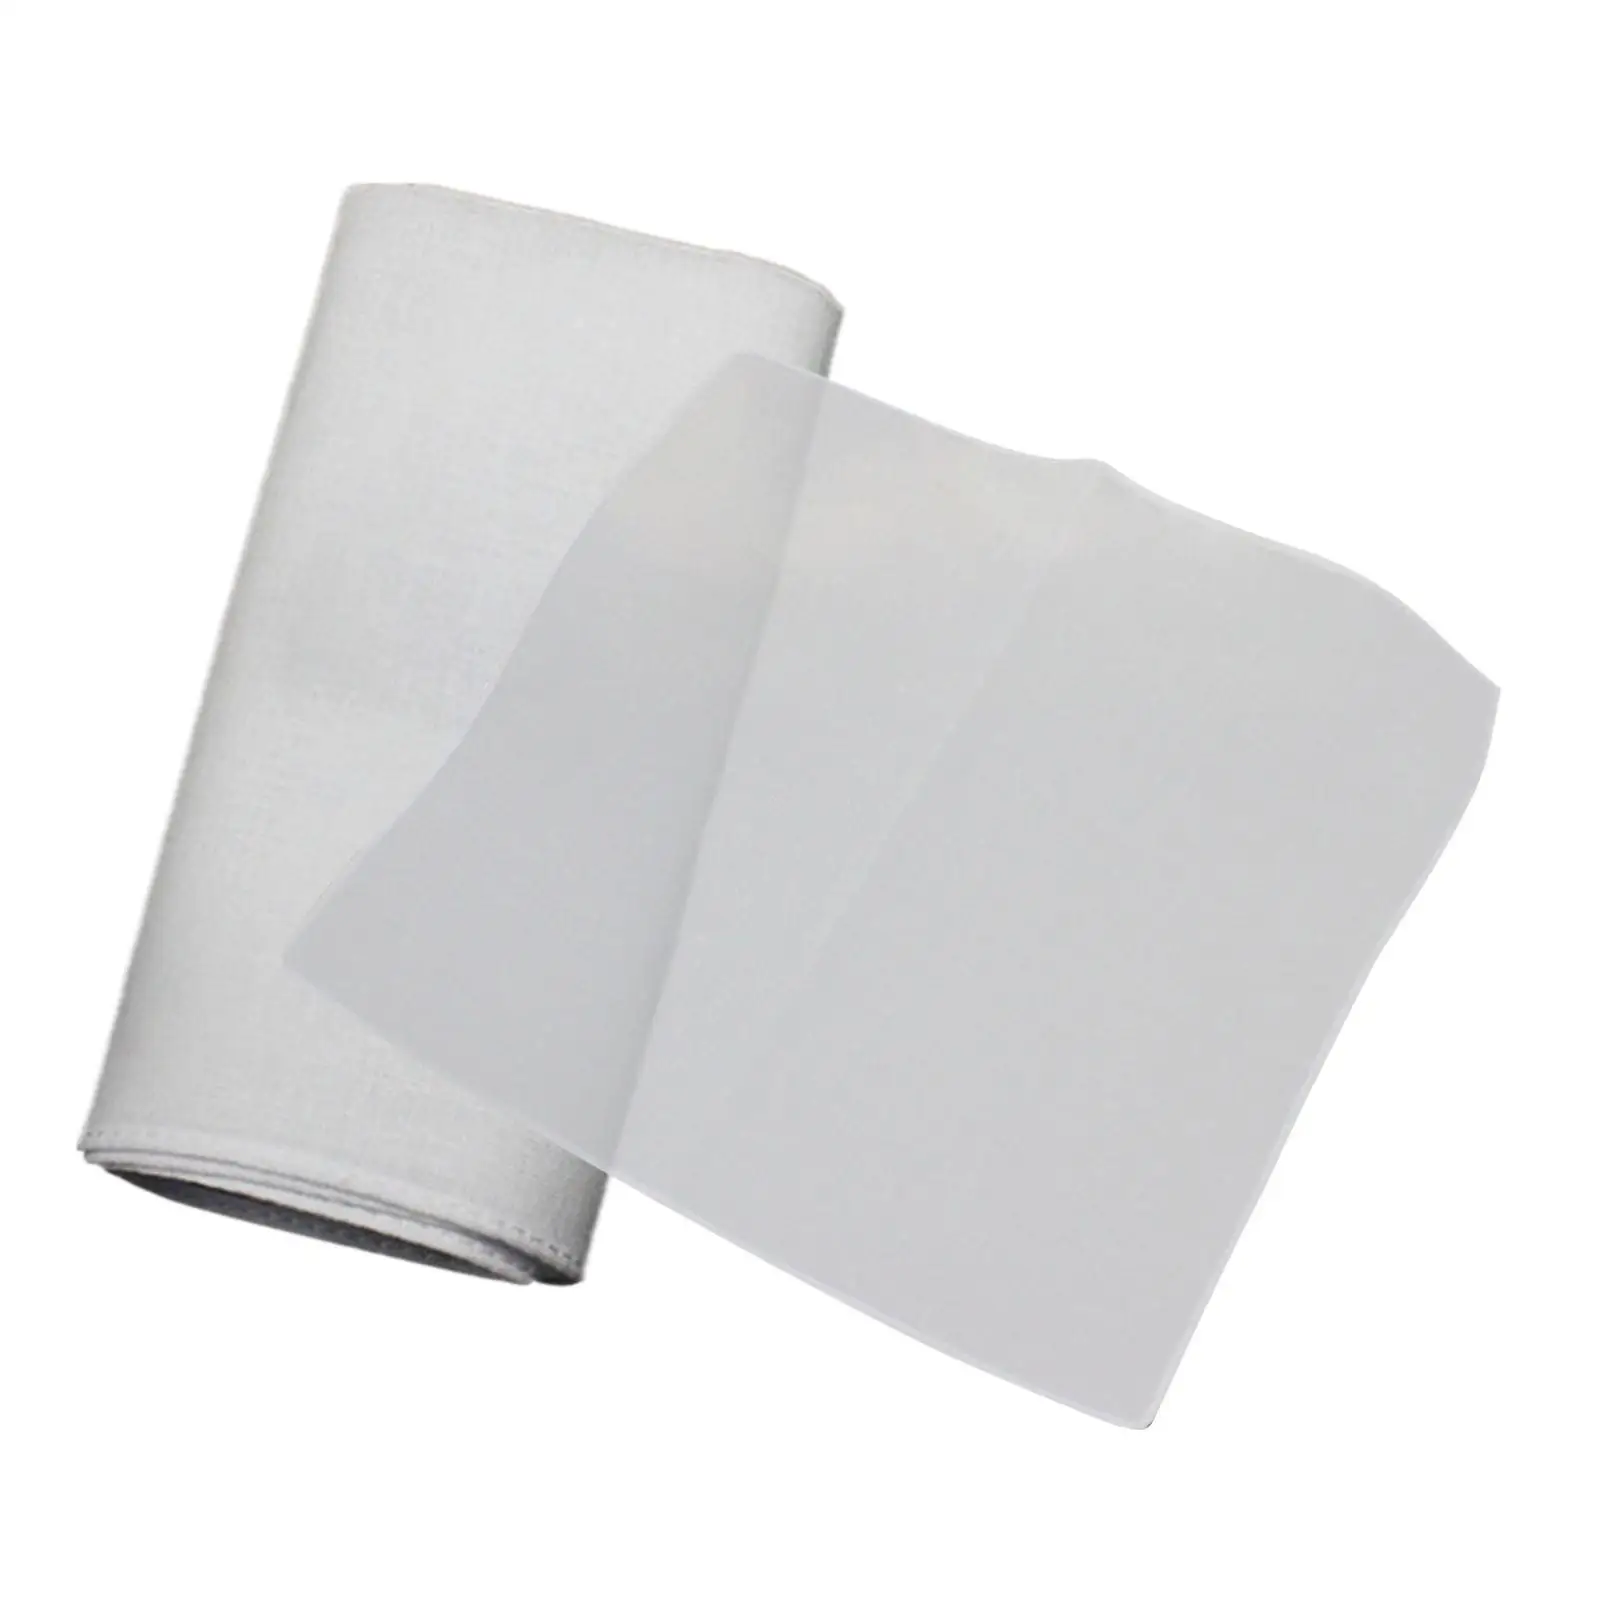 

10x Solid White Handkerchiefs Pocket Squares for Men Women Soft 42S White Hankies Men's Handkerchiefs for Dyeing DIY Crafts